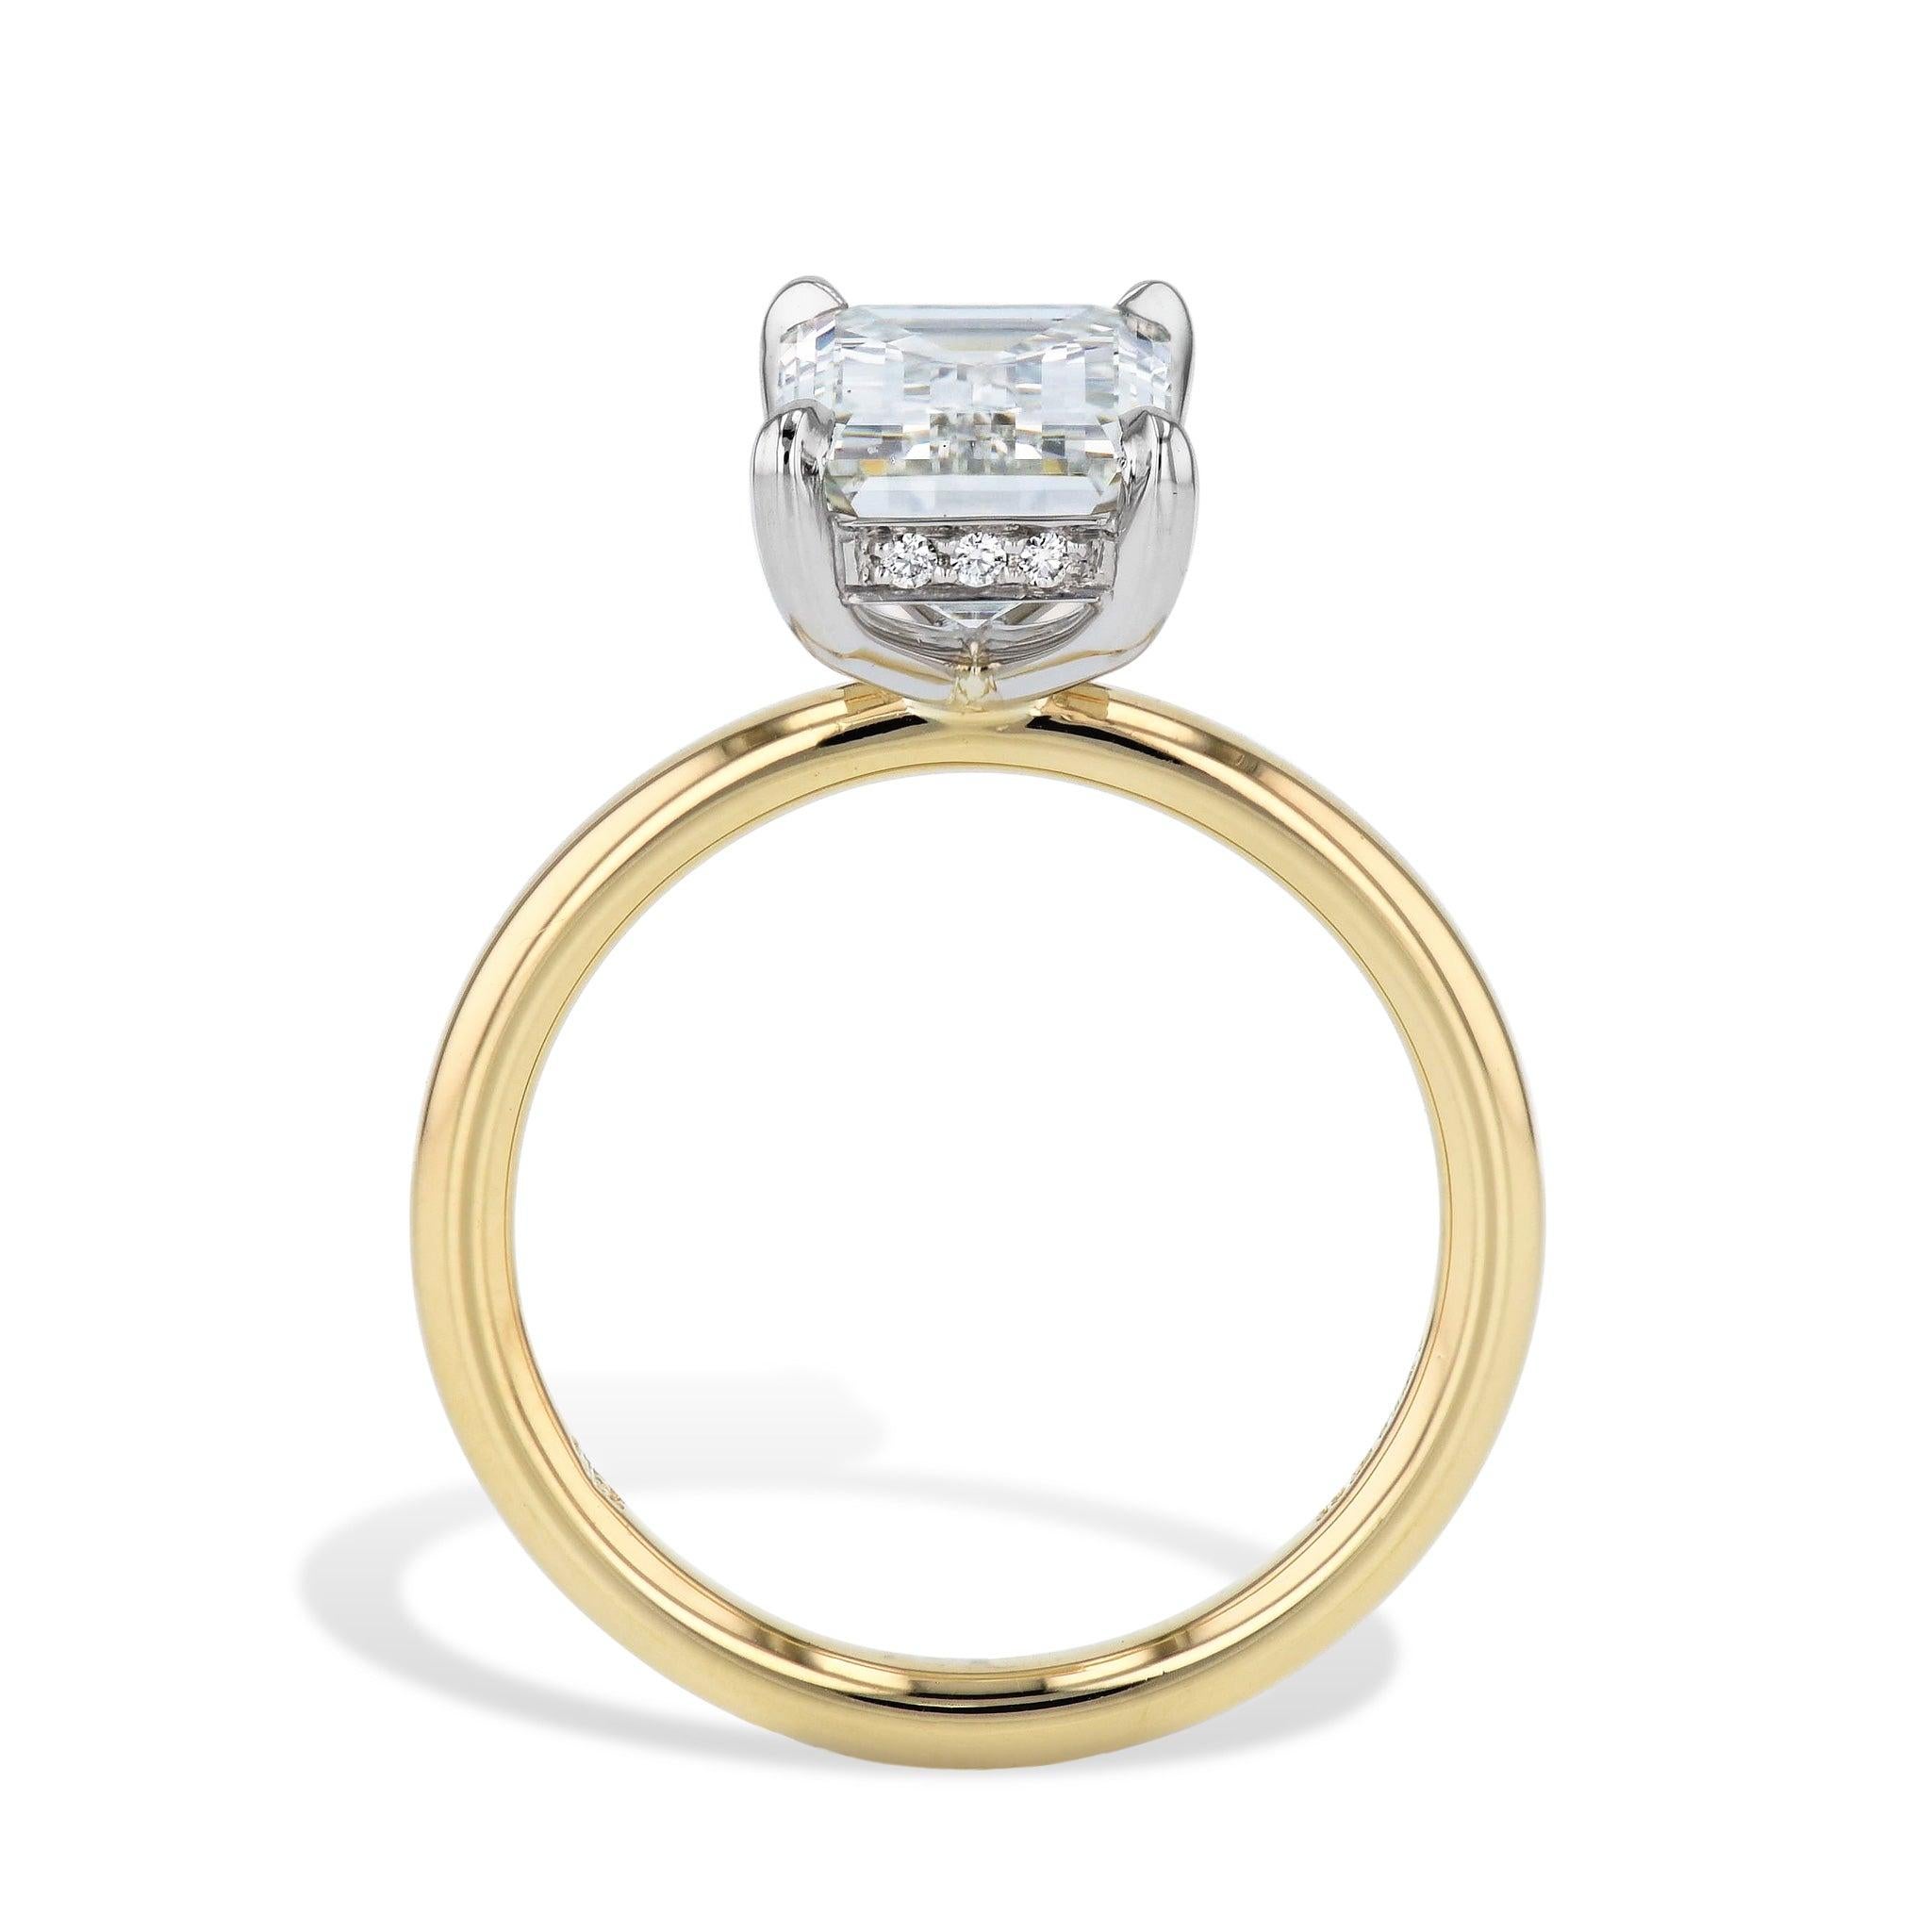 Elevate your engagement proposal with this breathtaking Emerald Cut Diamond Engagement Ring. Featuring a stunning 3.01 carat emerald cut center diamond set in a 4 prong platinum head, and surrounded by 18 pieces of pave diamonds underneath the